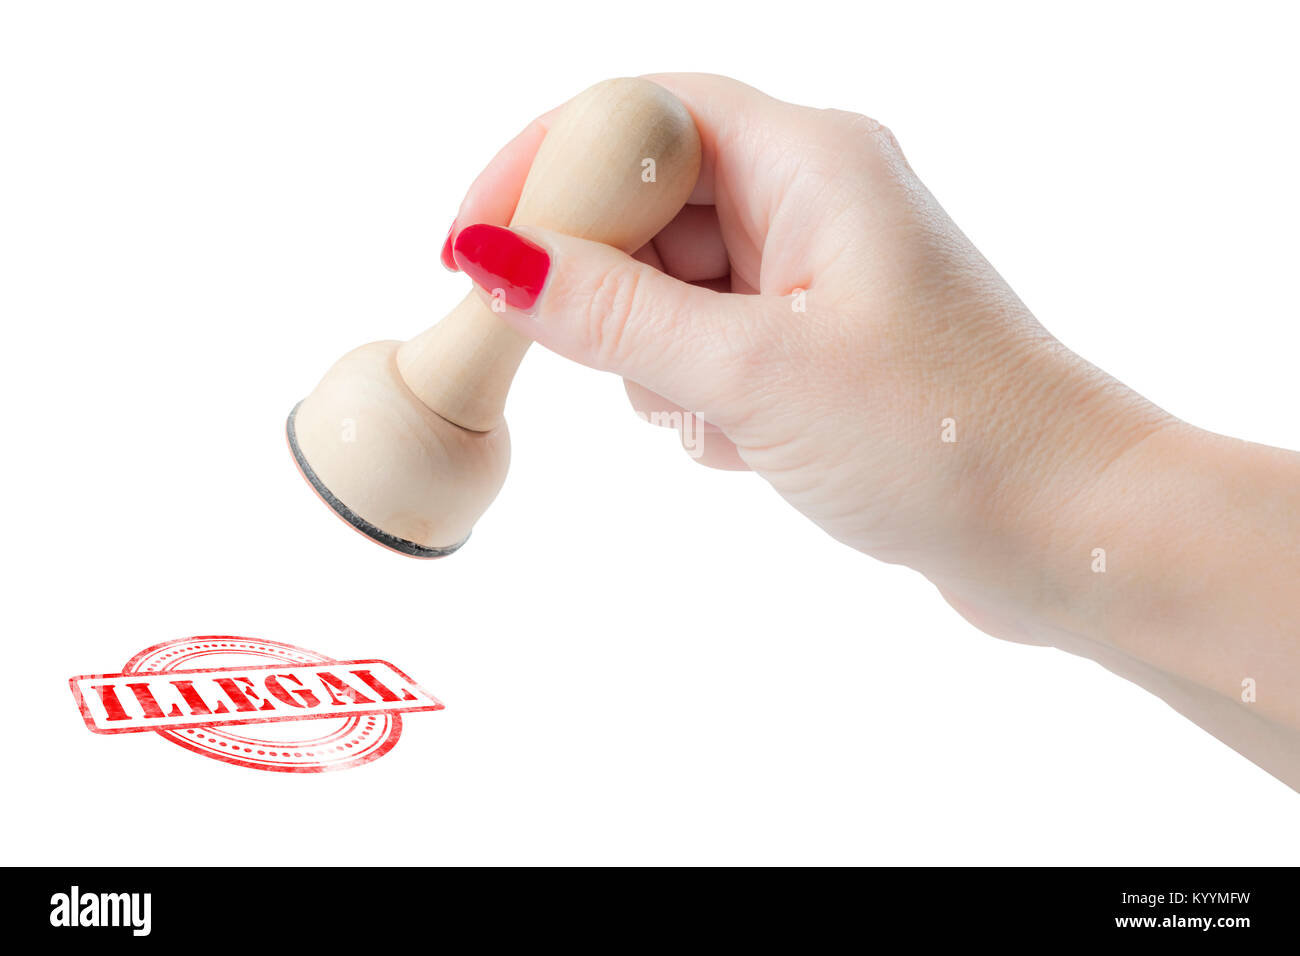 Hand holding a rubber stamp with the word illegal isolated on a white background Stock Photo